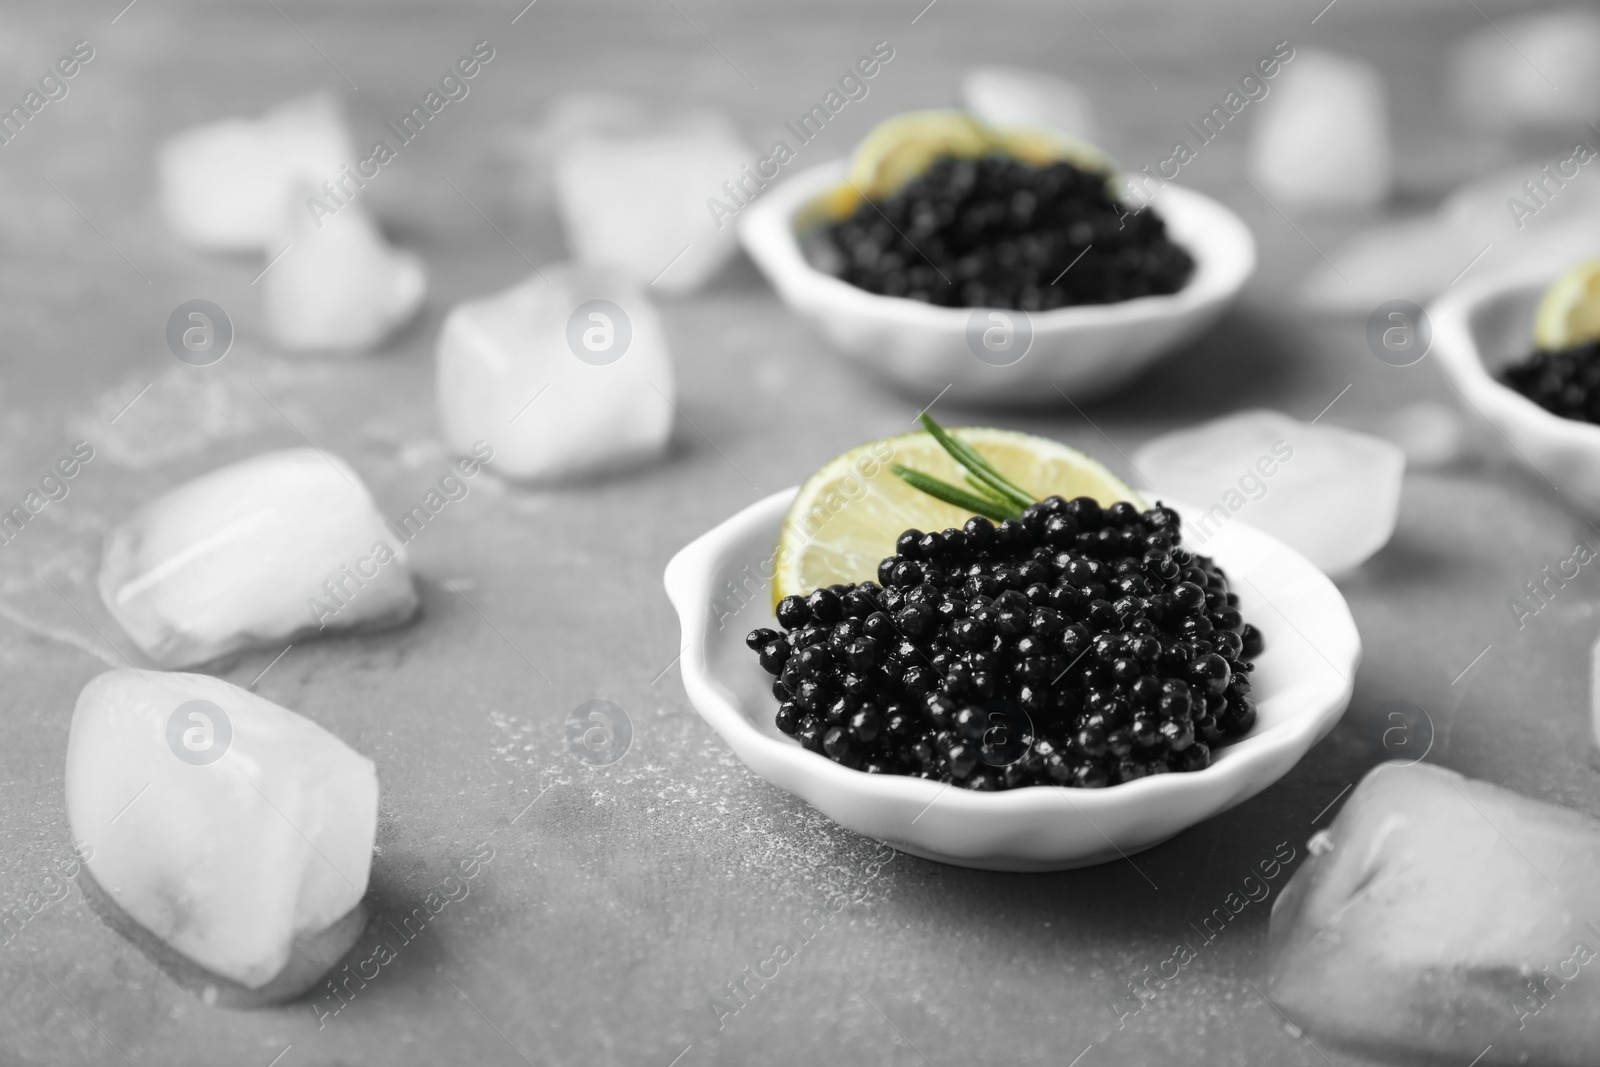 Photo of Plate with black caviar and ice cubes on grey background